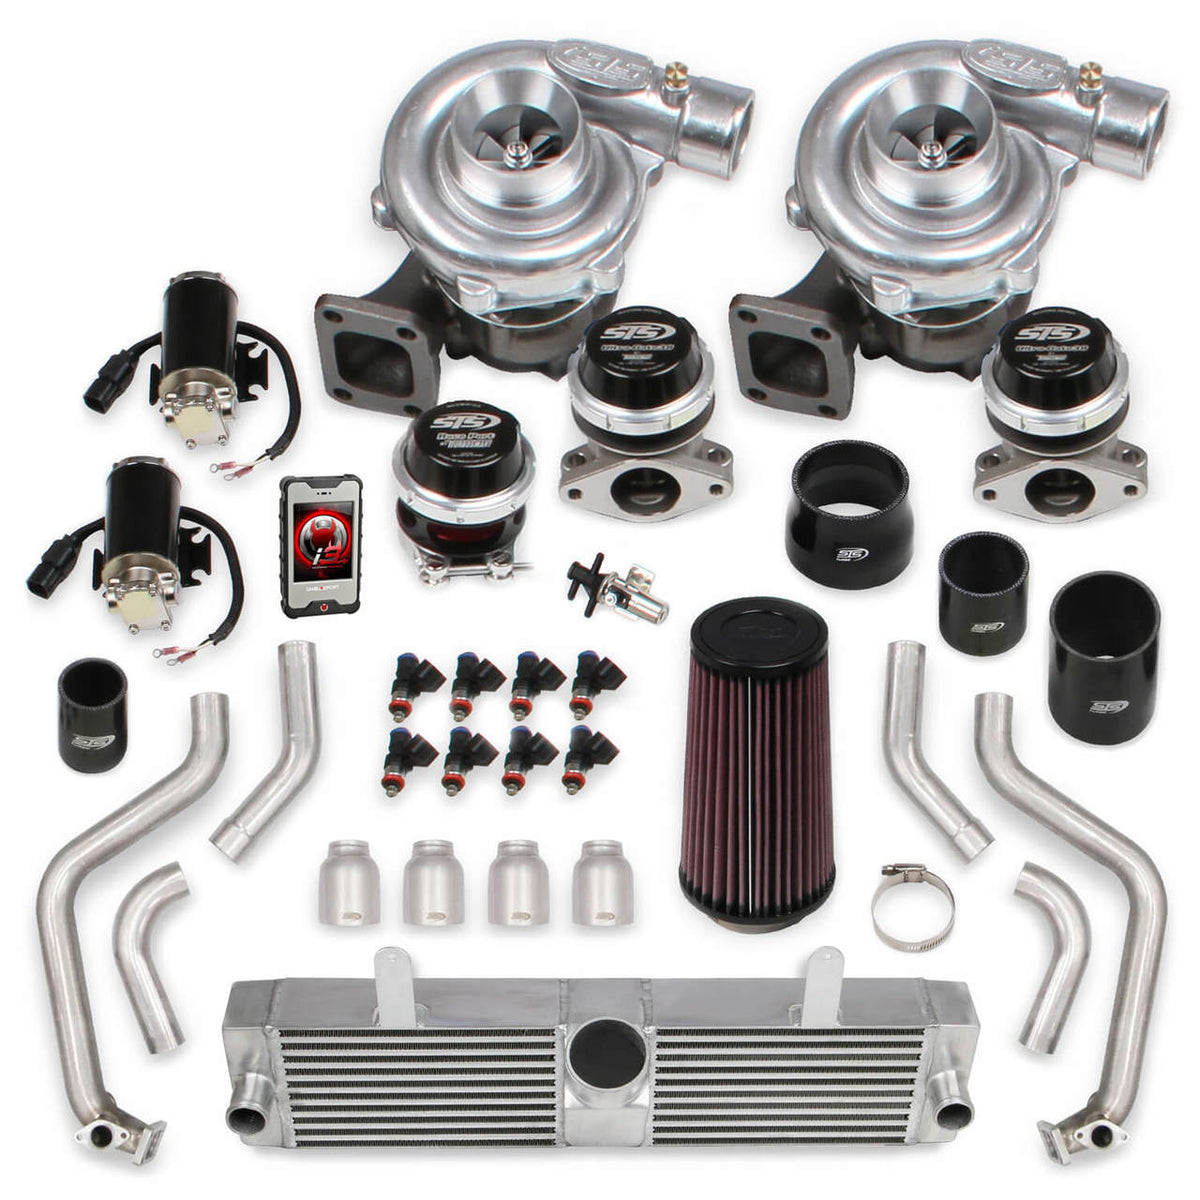 2009-2013 CORVETTE C6 W/LS3 STS REAR MOUNTED TWIN TURBO SYSTEM TUNING KIT